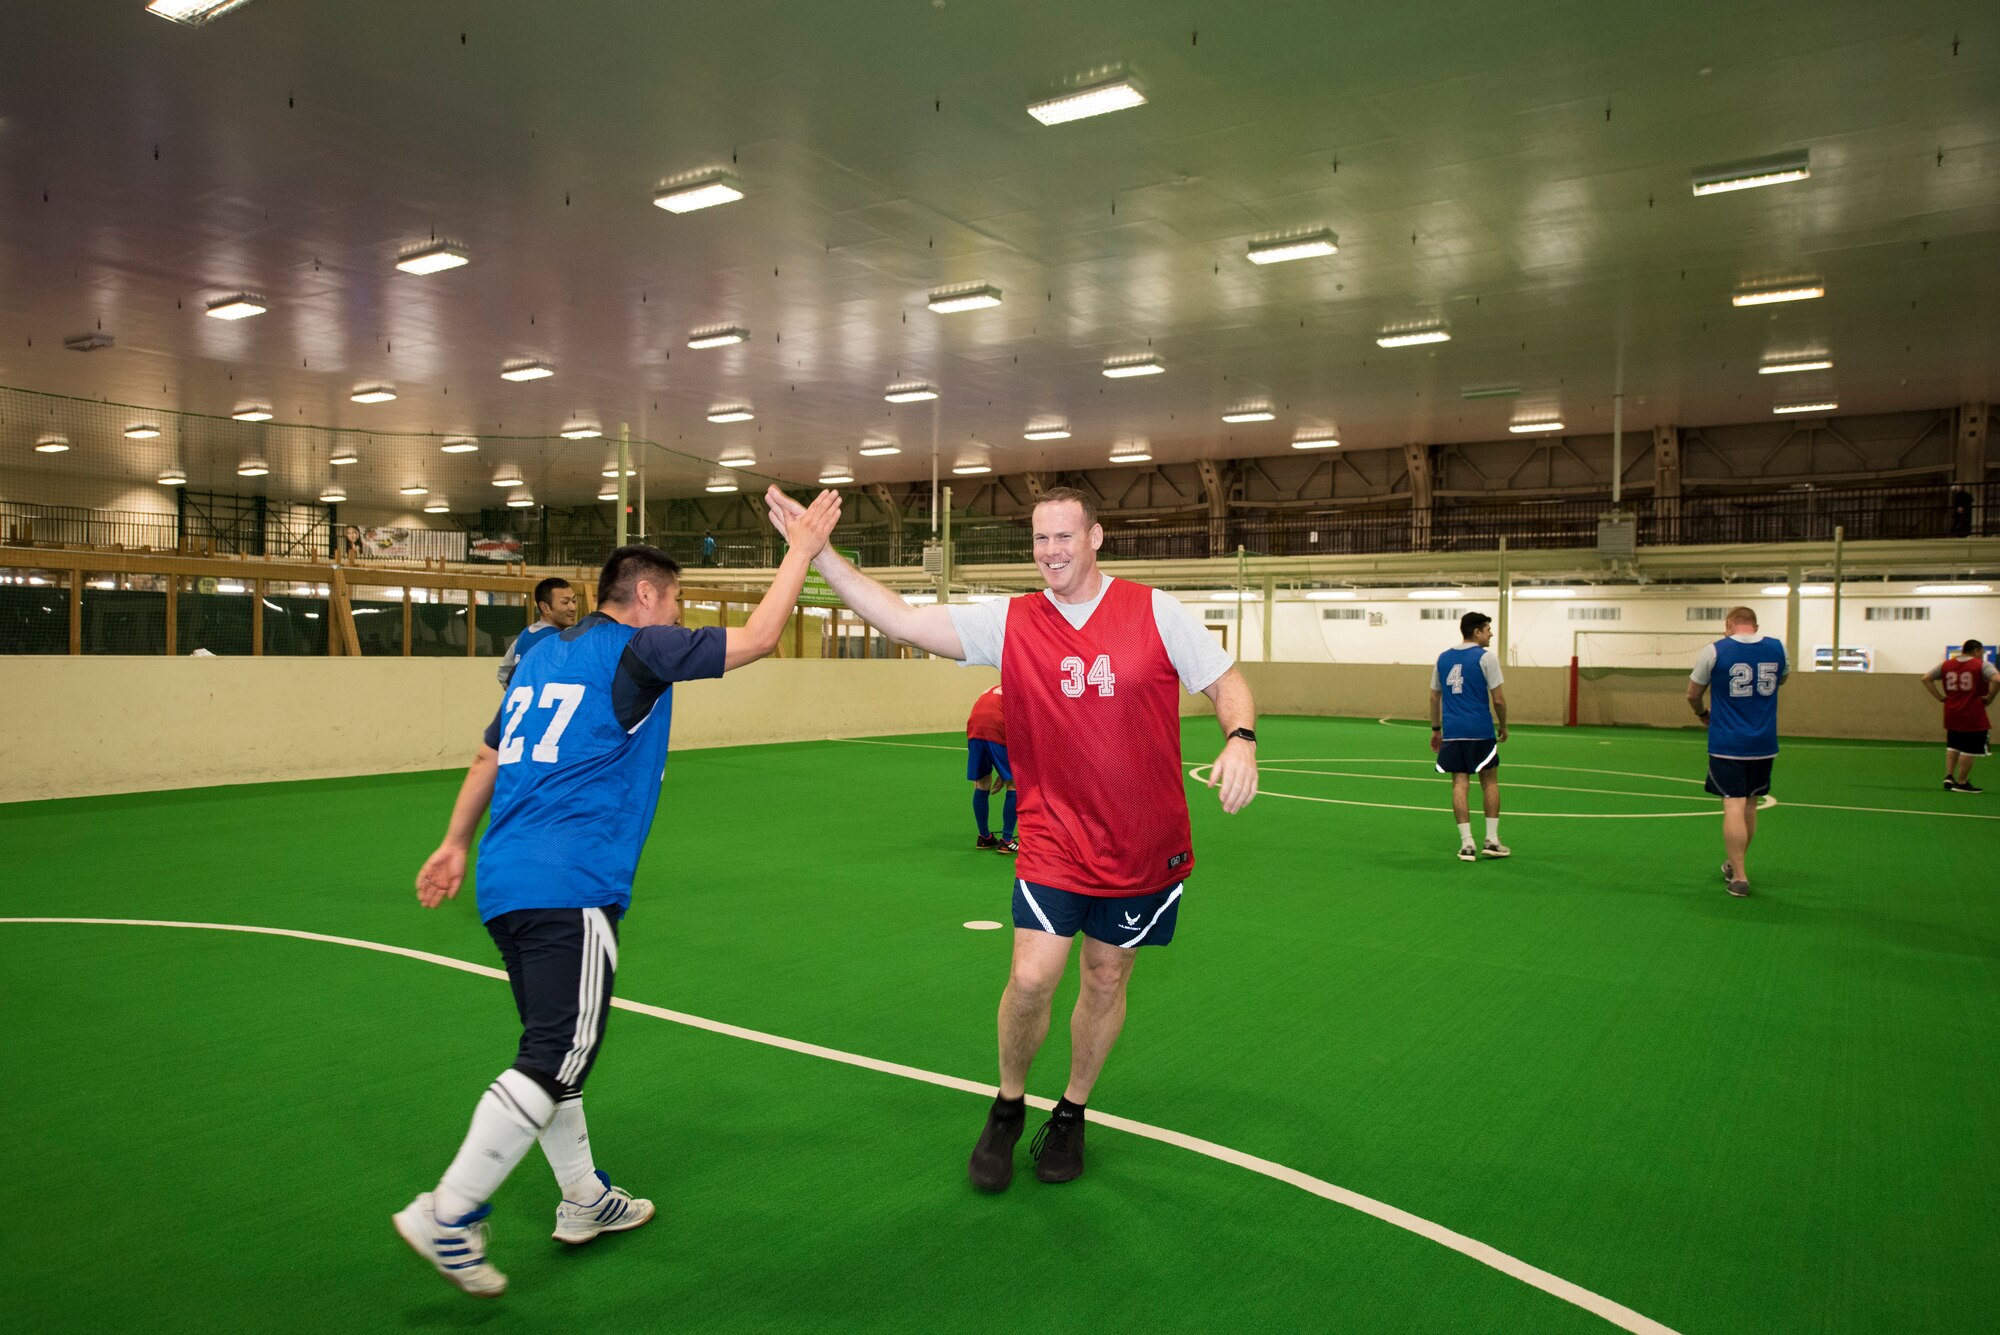 U.S. Air Force Senior Master Sgt. Bruce Rick, right, the 35th Security Forces Squadron operations superintendent, and Staff Sgt. Shouta Hasegawa, left, a 3rd Air Wing security guard, high five during a bilateral soccer game at Misawa Air Base, Japan, March 15, 2019.  The soccer game is one of many events hosted by Misawa AB to increase camaraderie and teamwork. (U.S. Air Force photo by Branden Yamada)